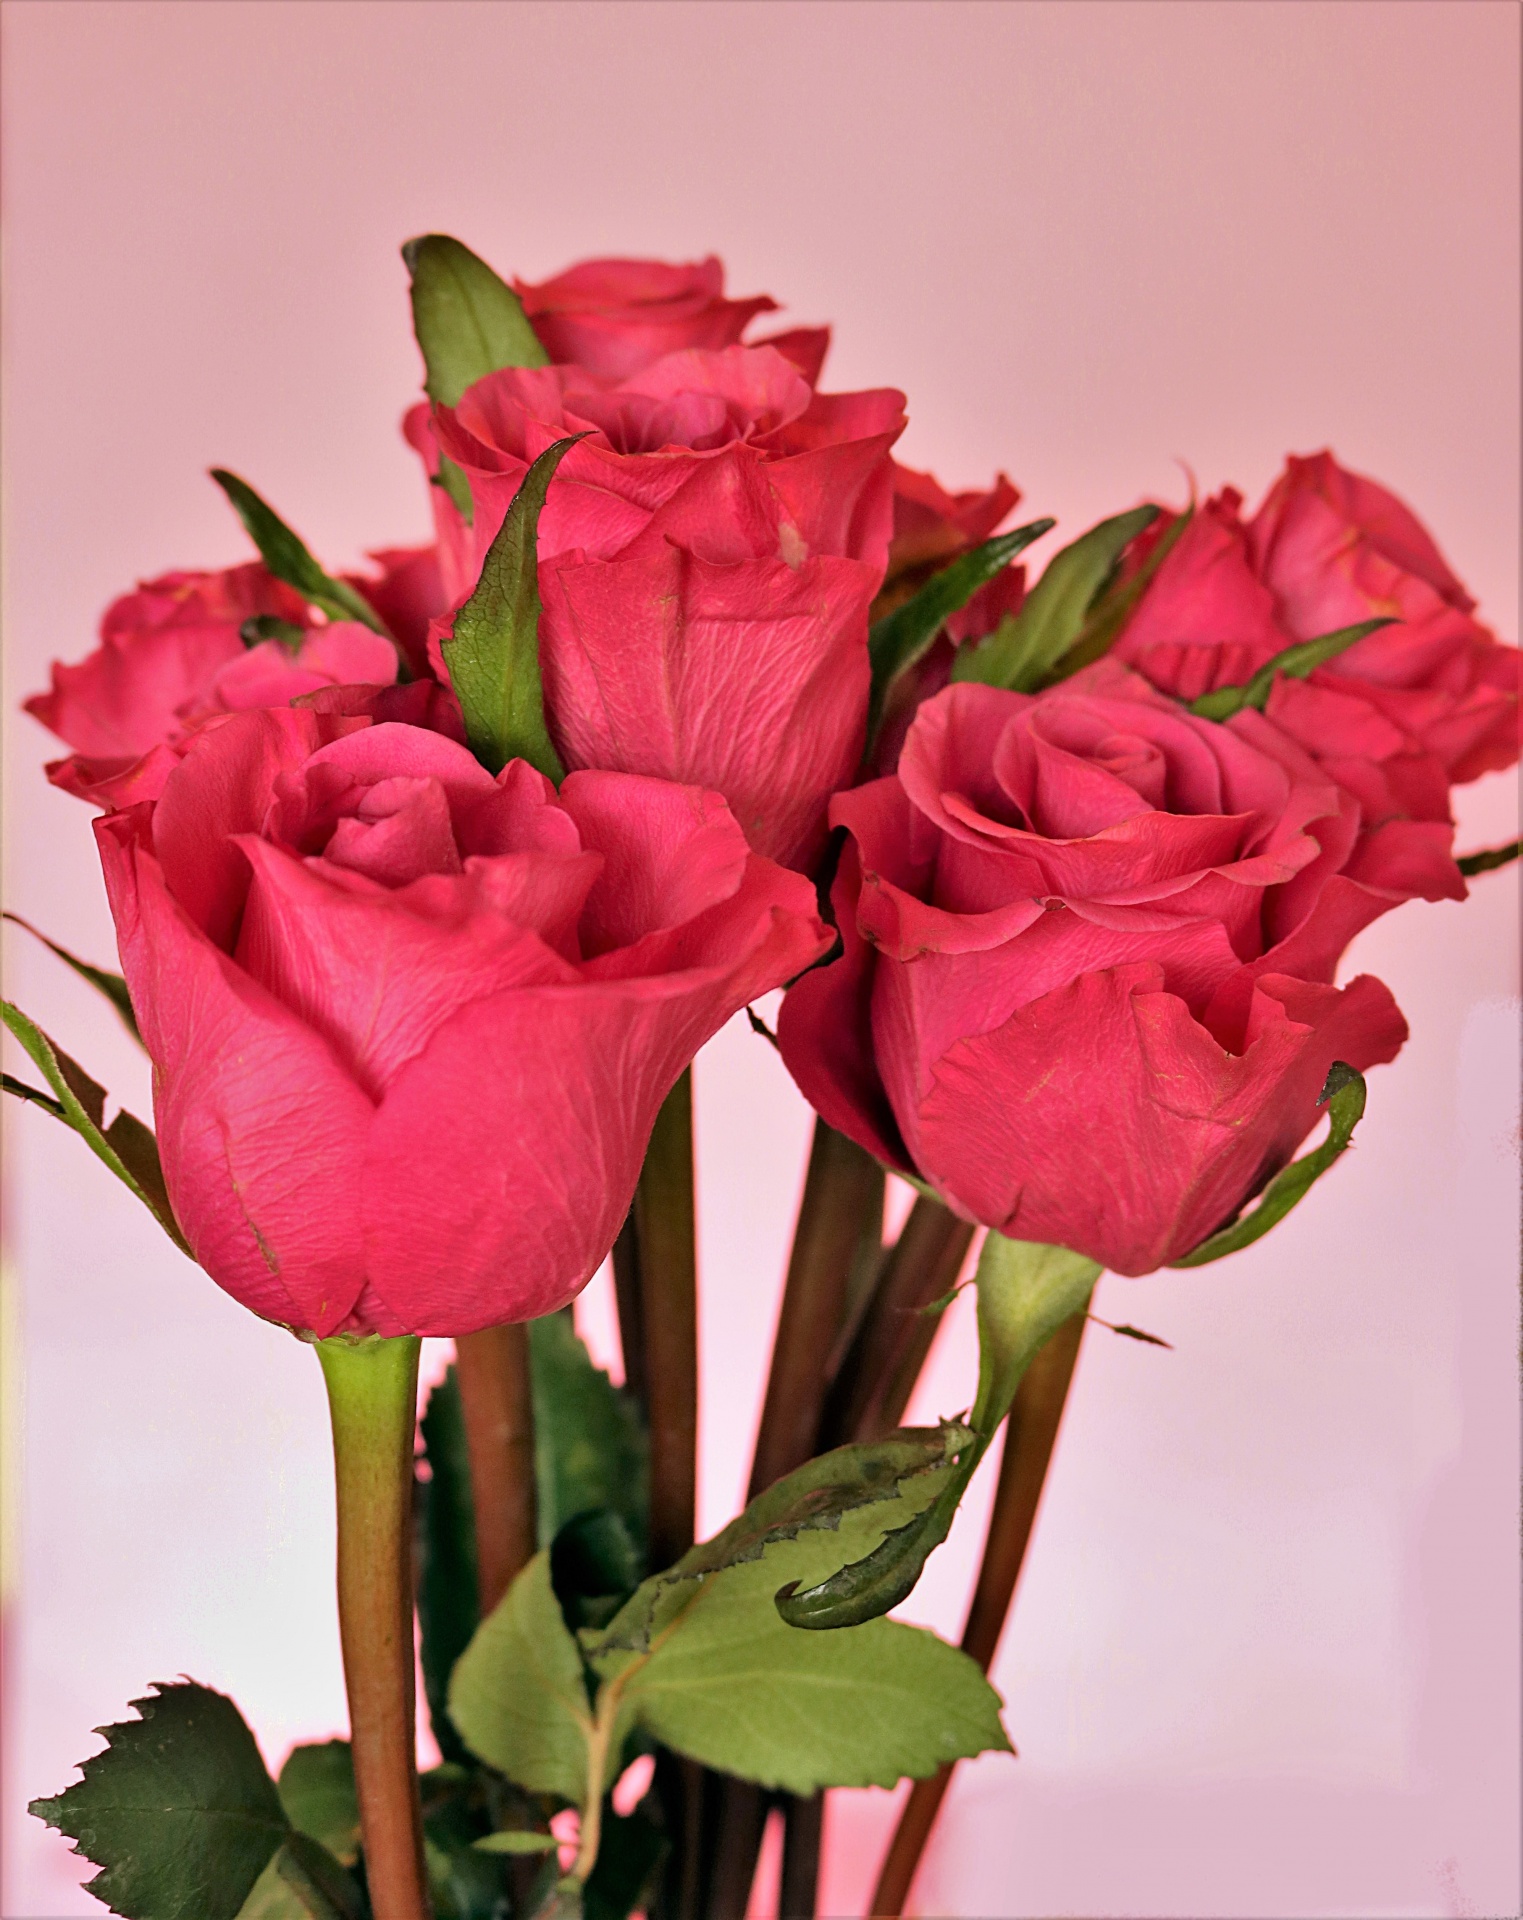 A bouquet of pink rose buds on a pink background.